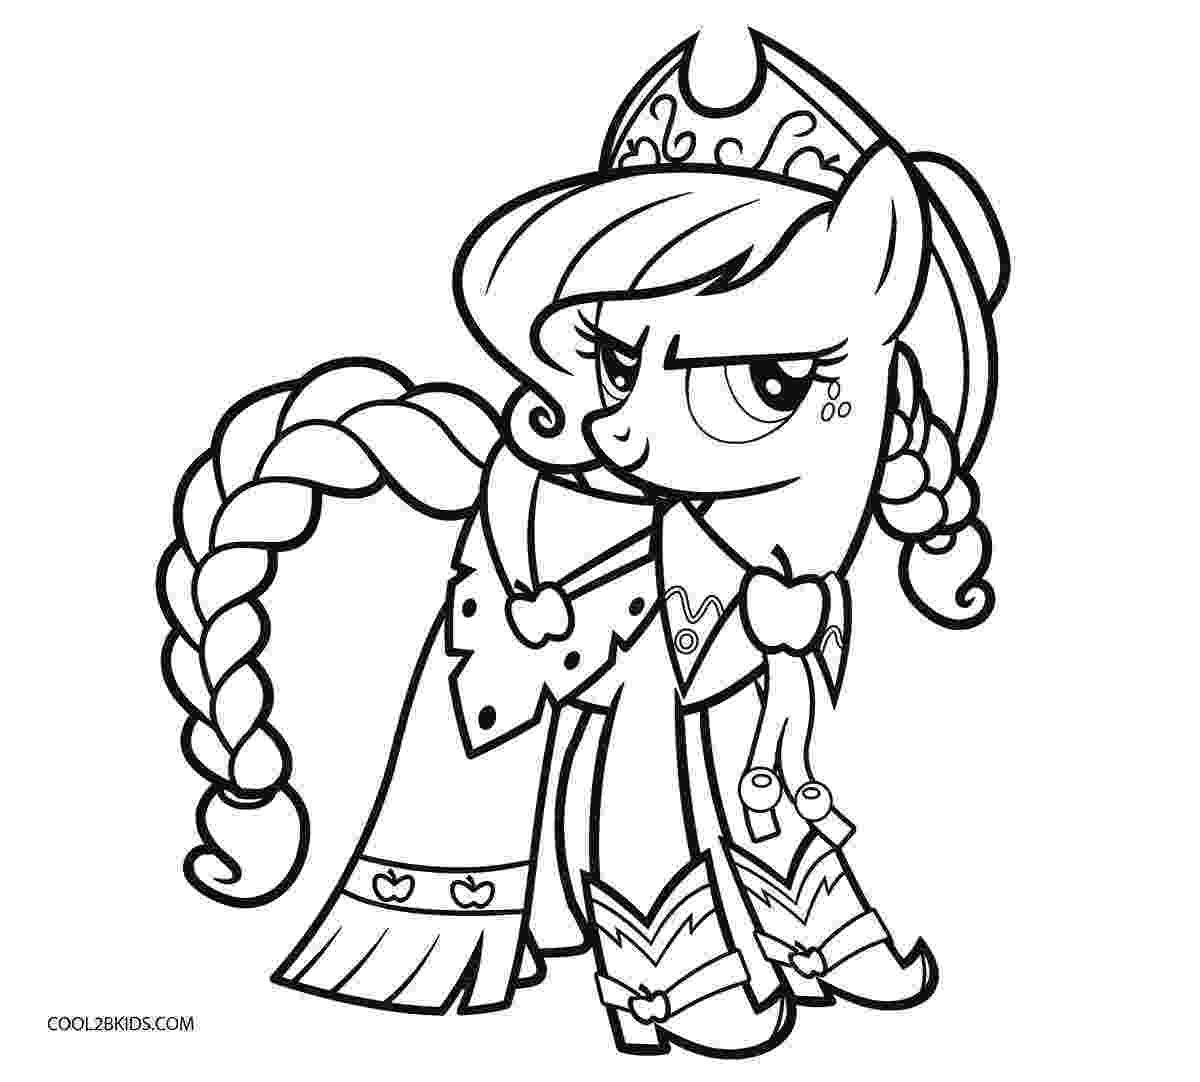 my little pony coloring sheets to print my little pony coloring pages team colors to print pony sheets coloring my little 